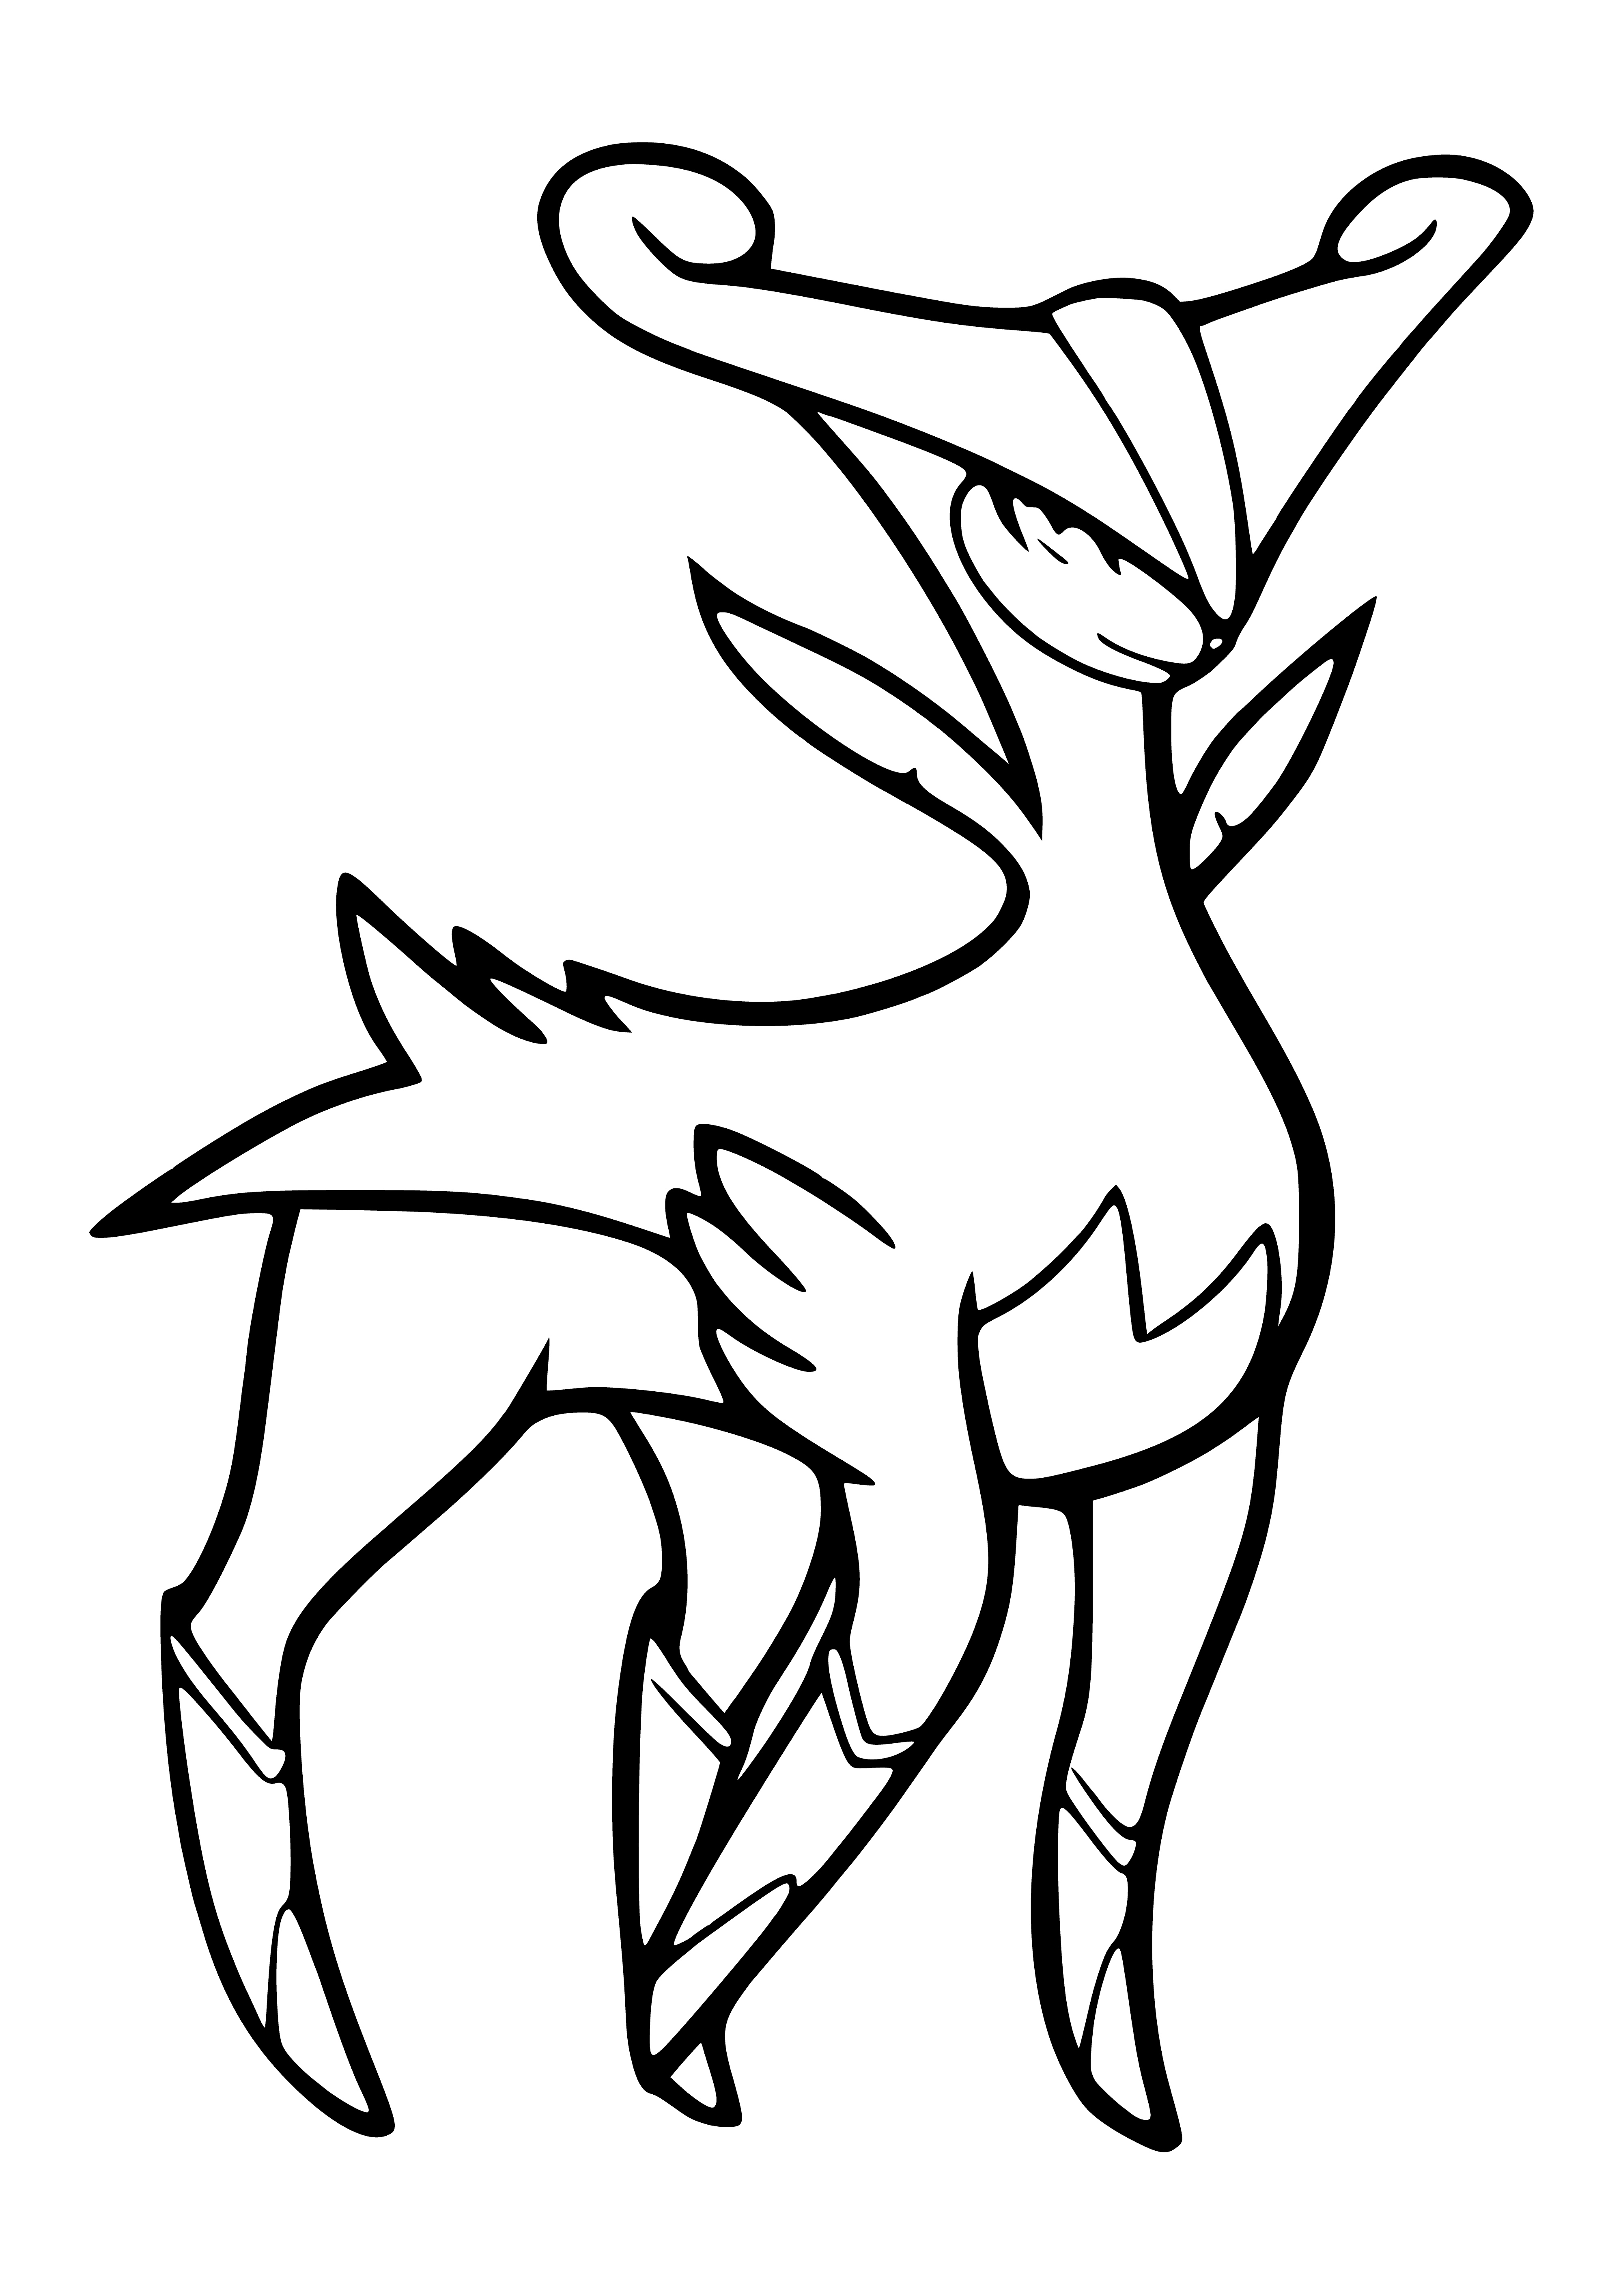 coloring page: Legendary Pokémon Virizion is green & white, has long neck/small head, wings, two horns & white-tipped tail.